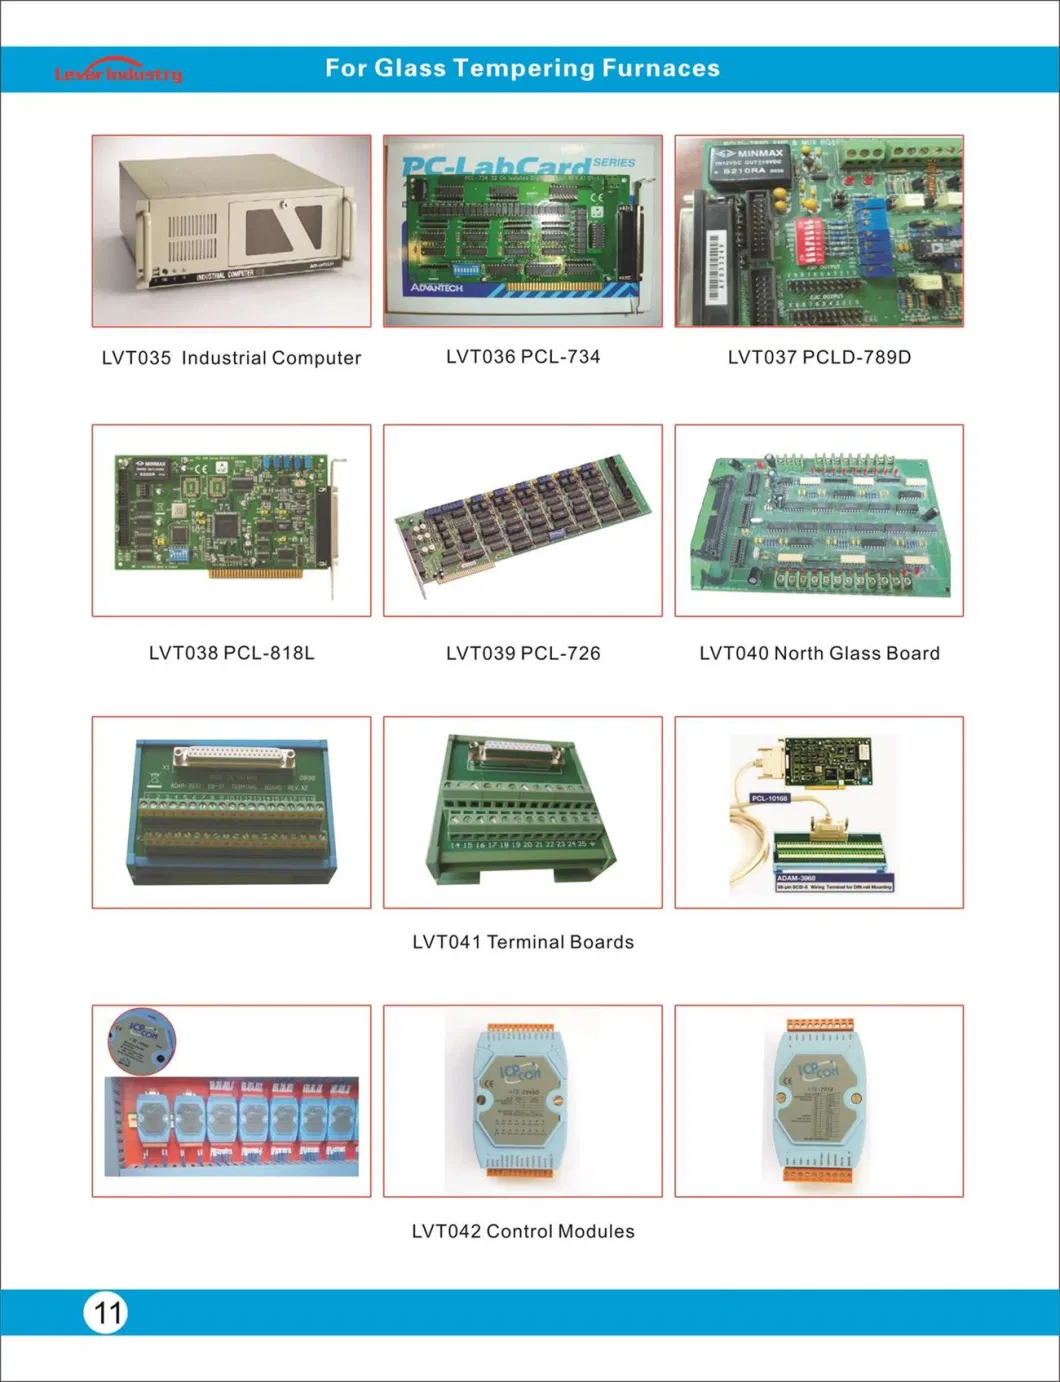 Parts for Tempering Furnace, Tempering Furnace Spare Parts